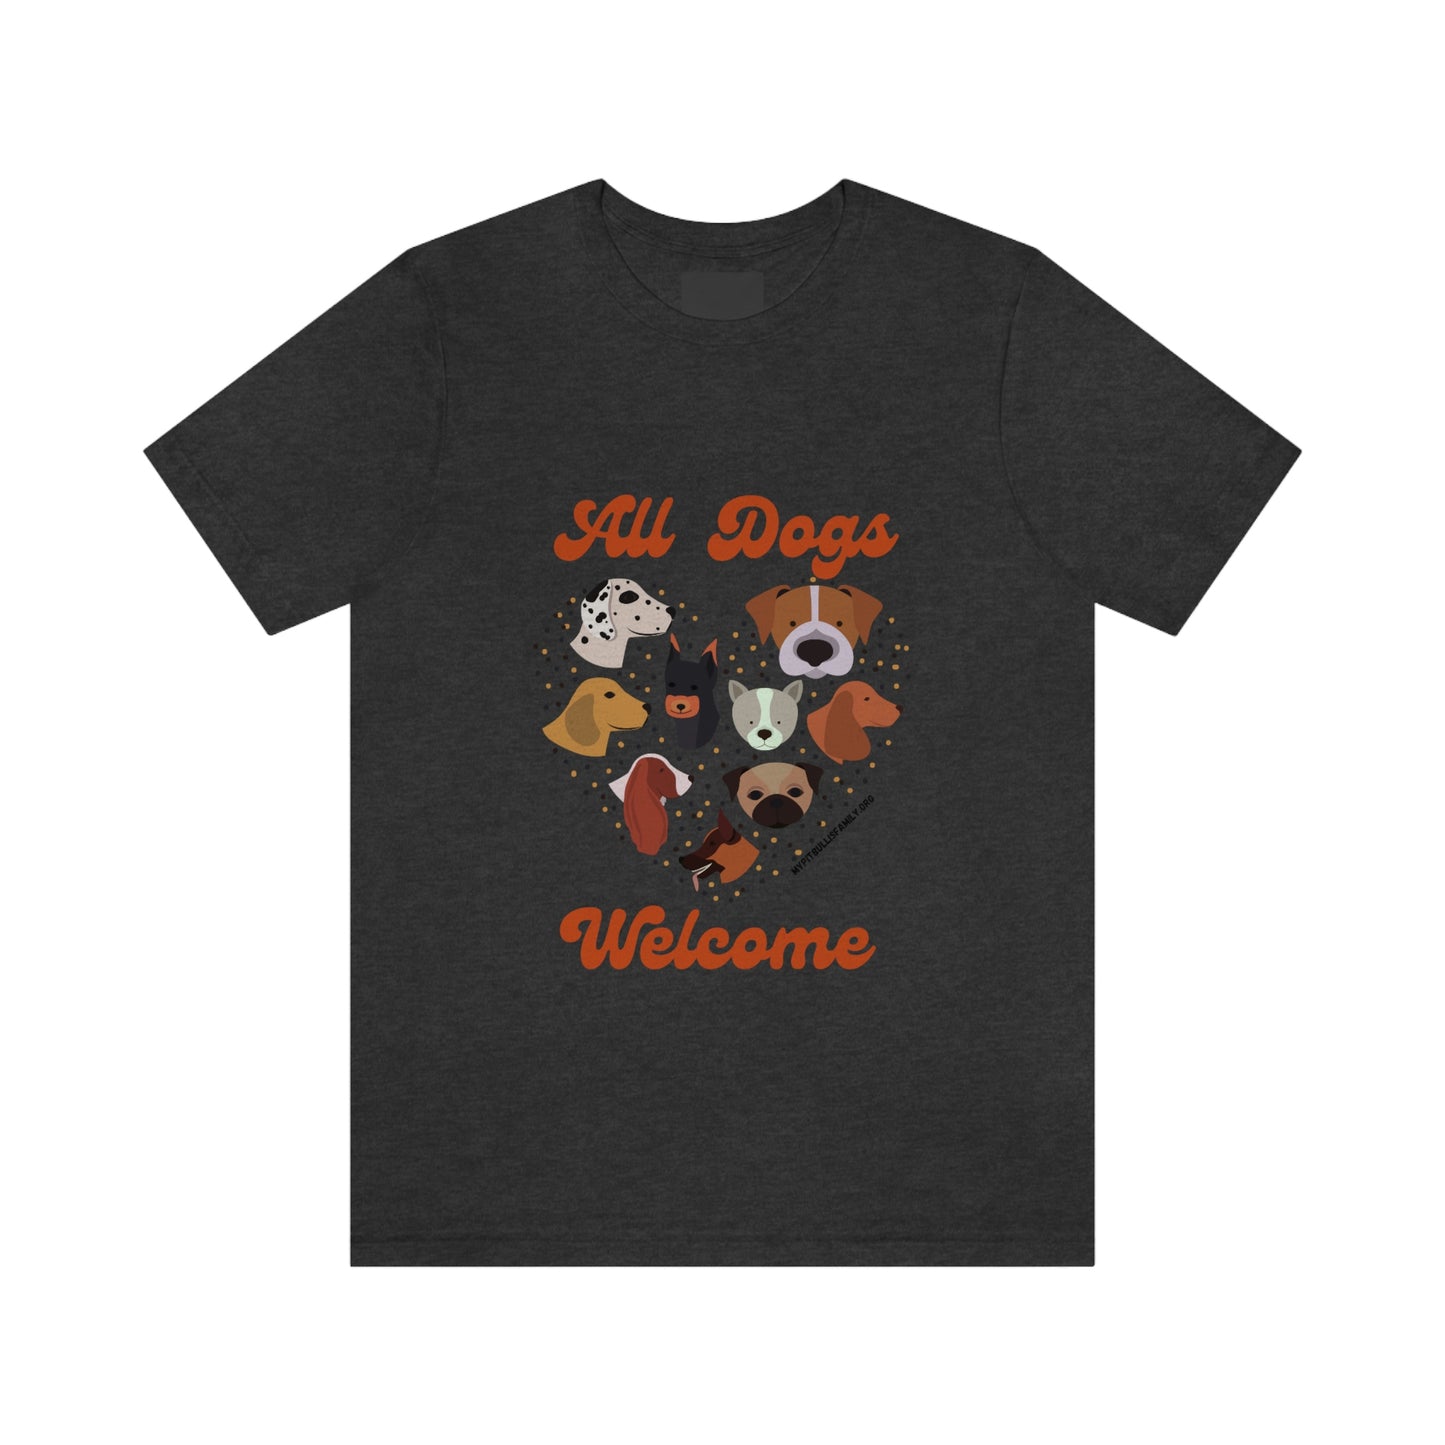 All Dogs Welcome Unisex Jersey Short Sleeve Tee